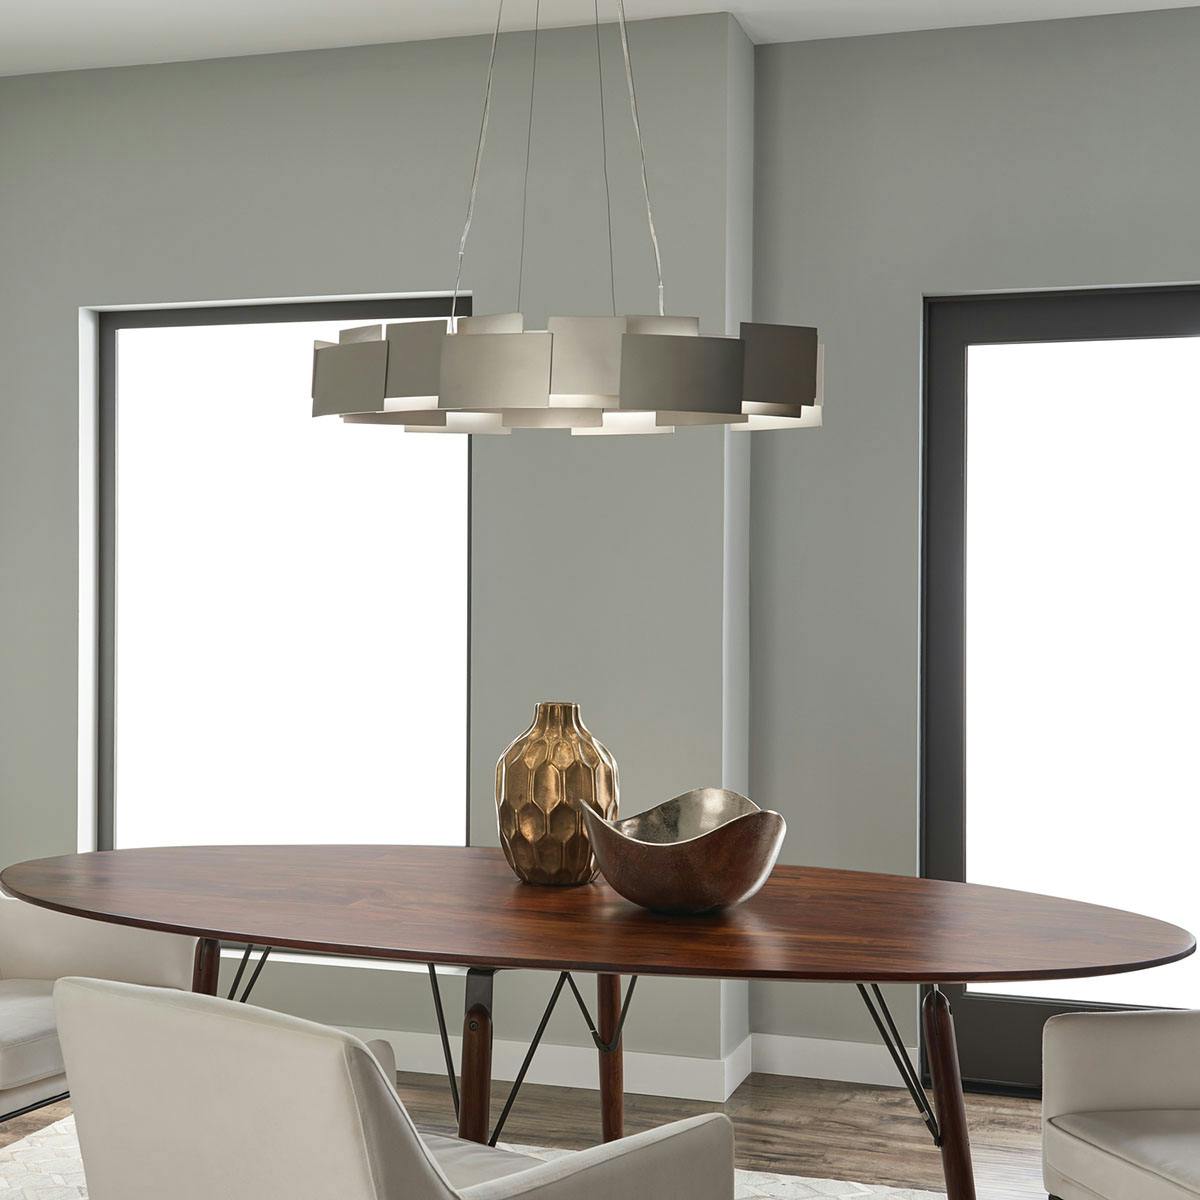 Day time dining room image featuring Moderne pendant 42993SNLED